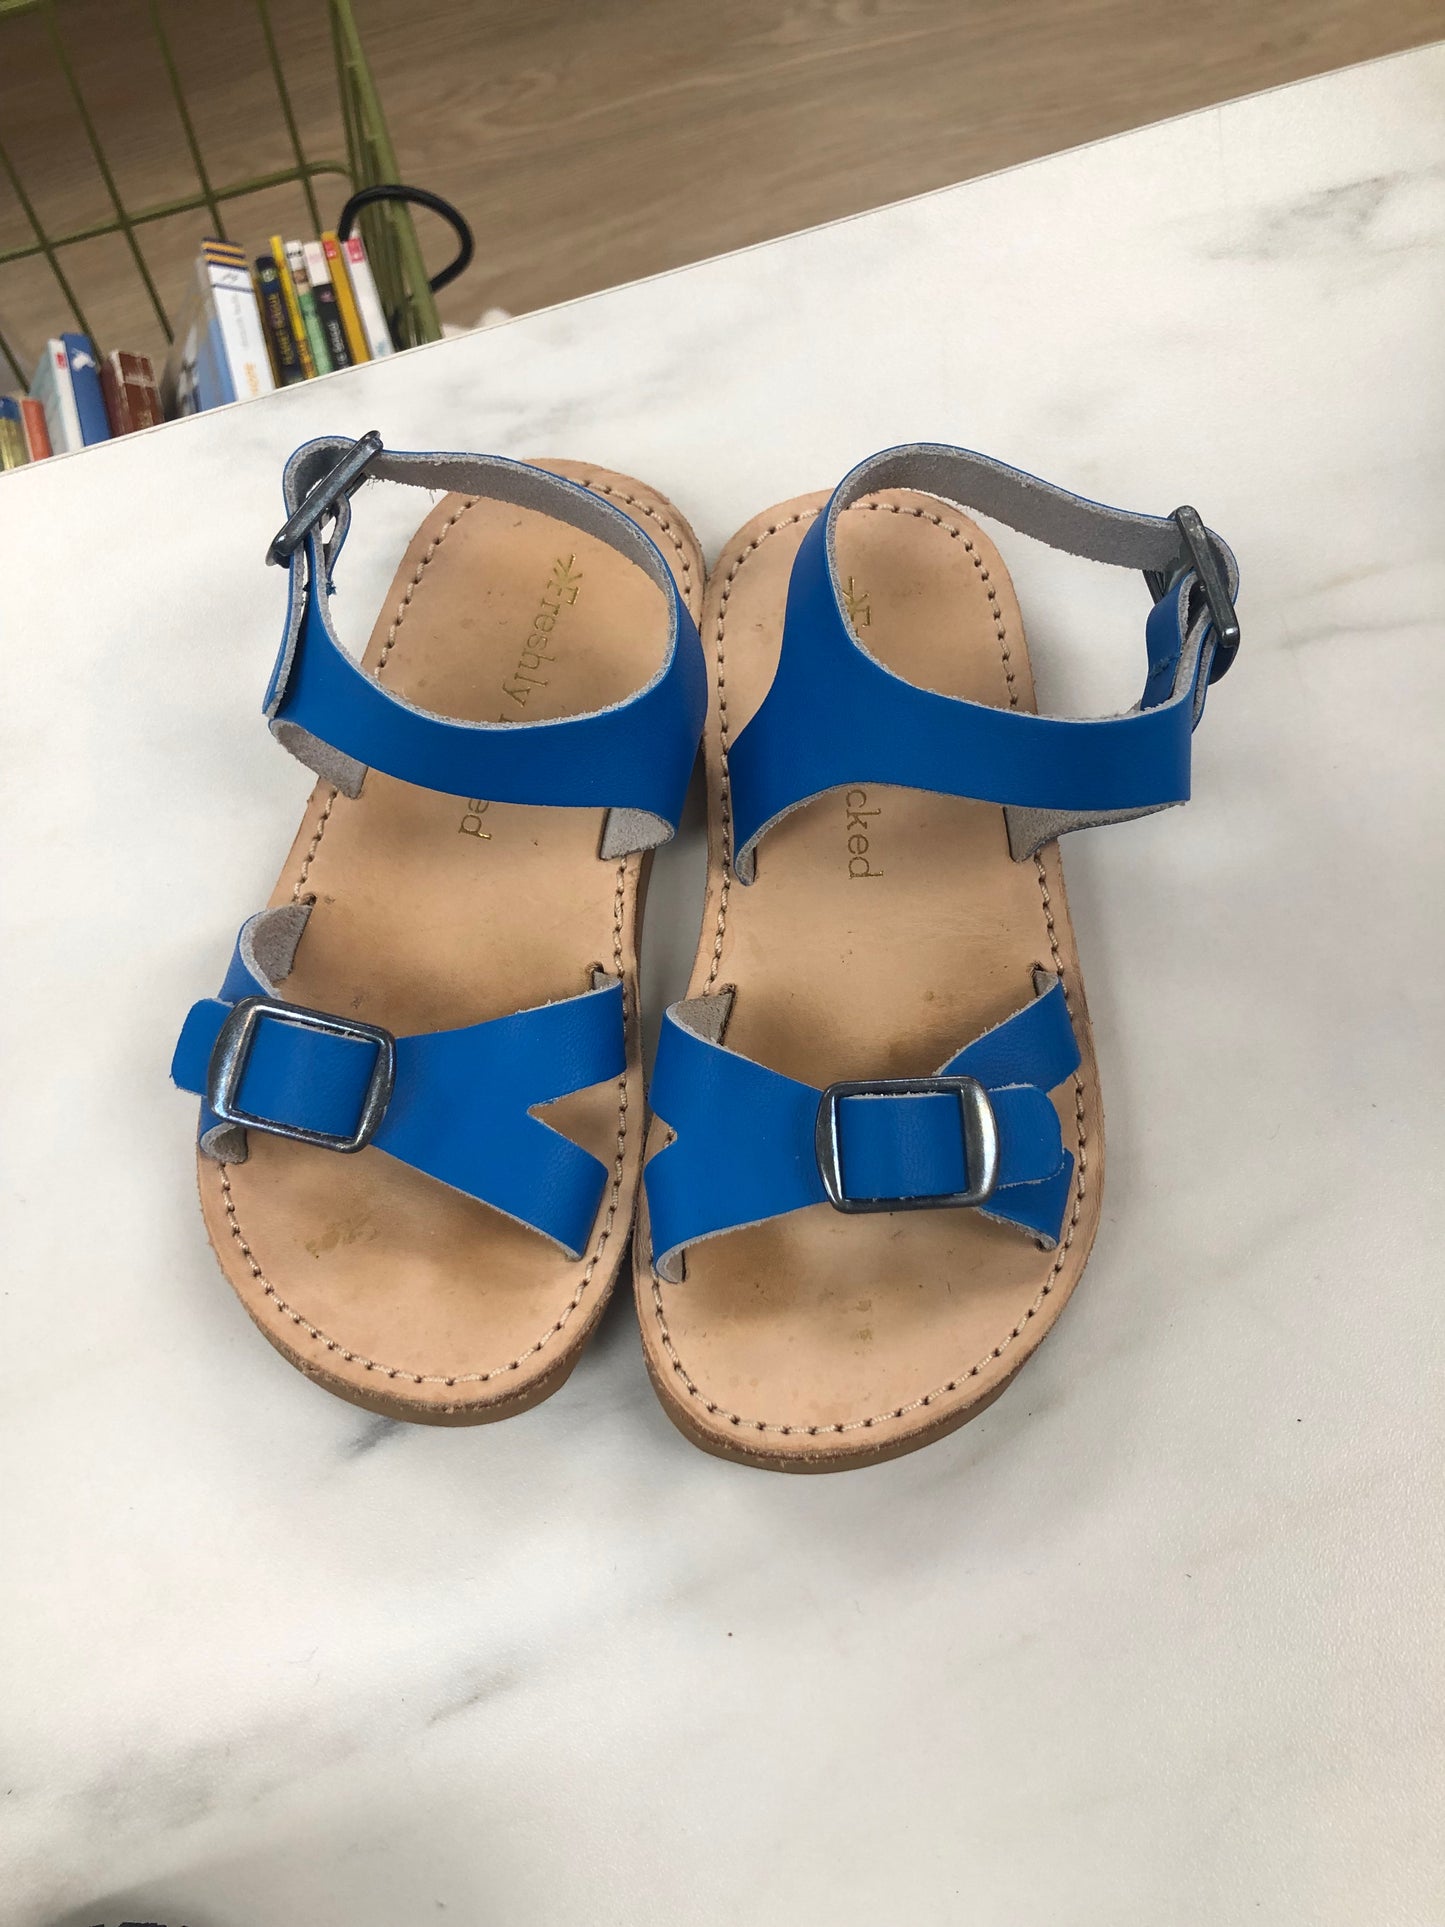 Freshly Picked Child Size 7 Blue Leather Shoes/Boots